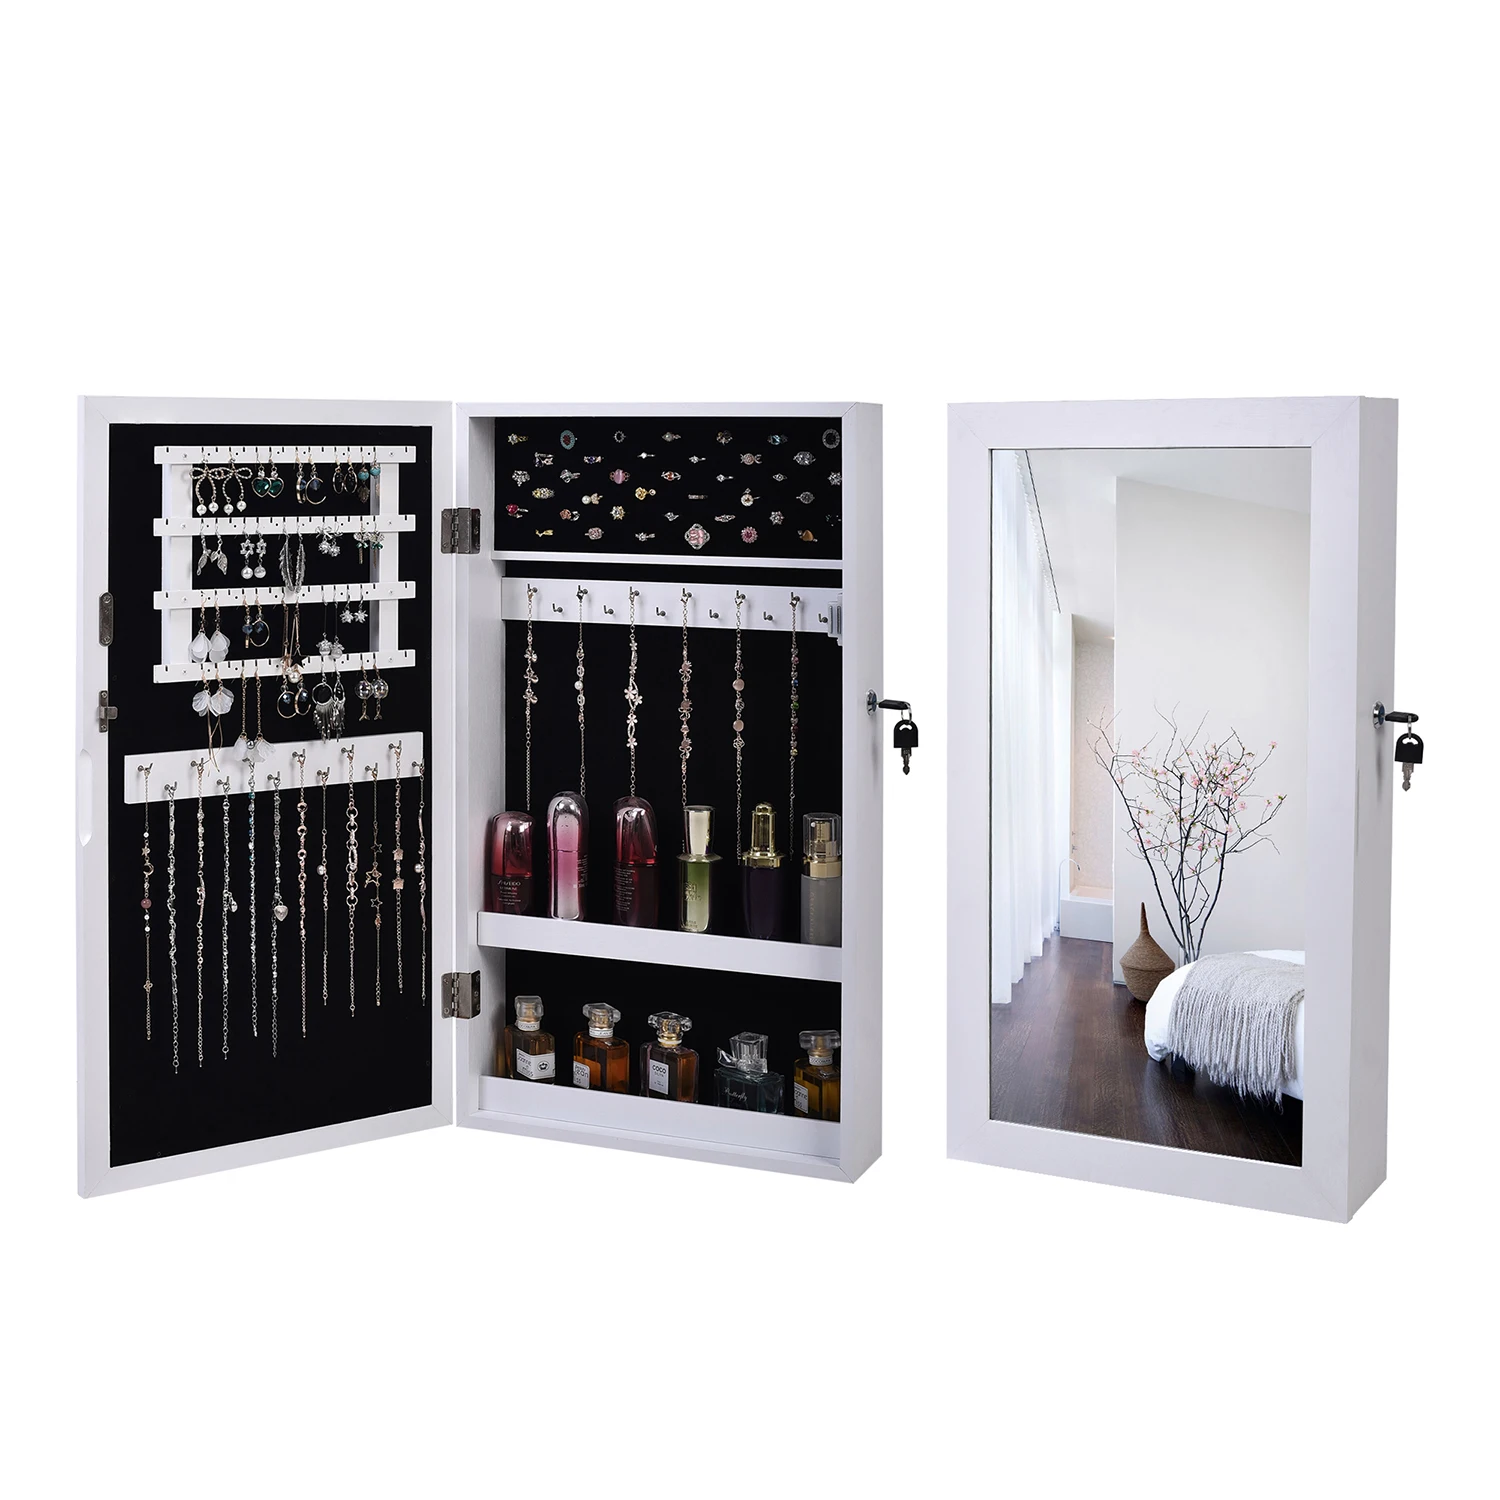 Bedroom Furniture Wall-mounted Mirror Jewelry Storage Cabinet Small Storage Cabinet Cosmetic Lockable Wall Storage Mirror